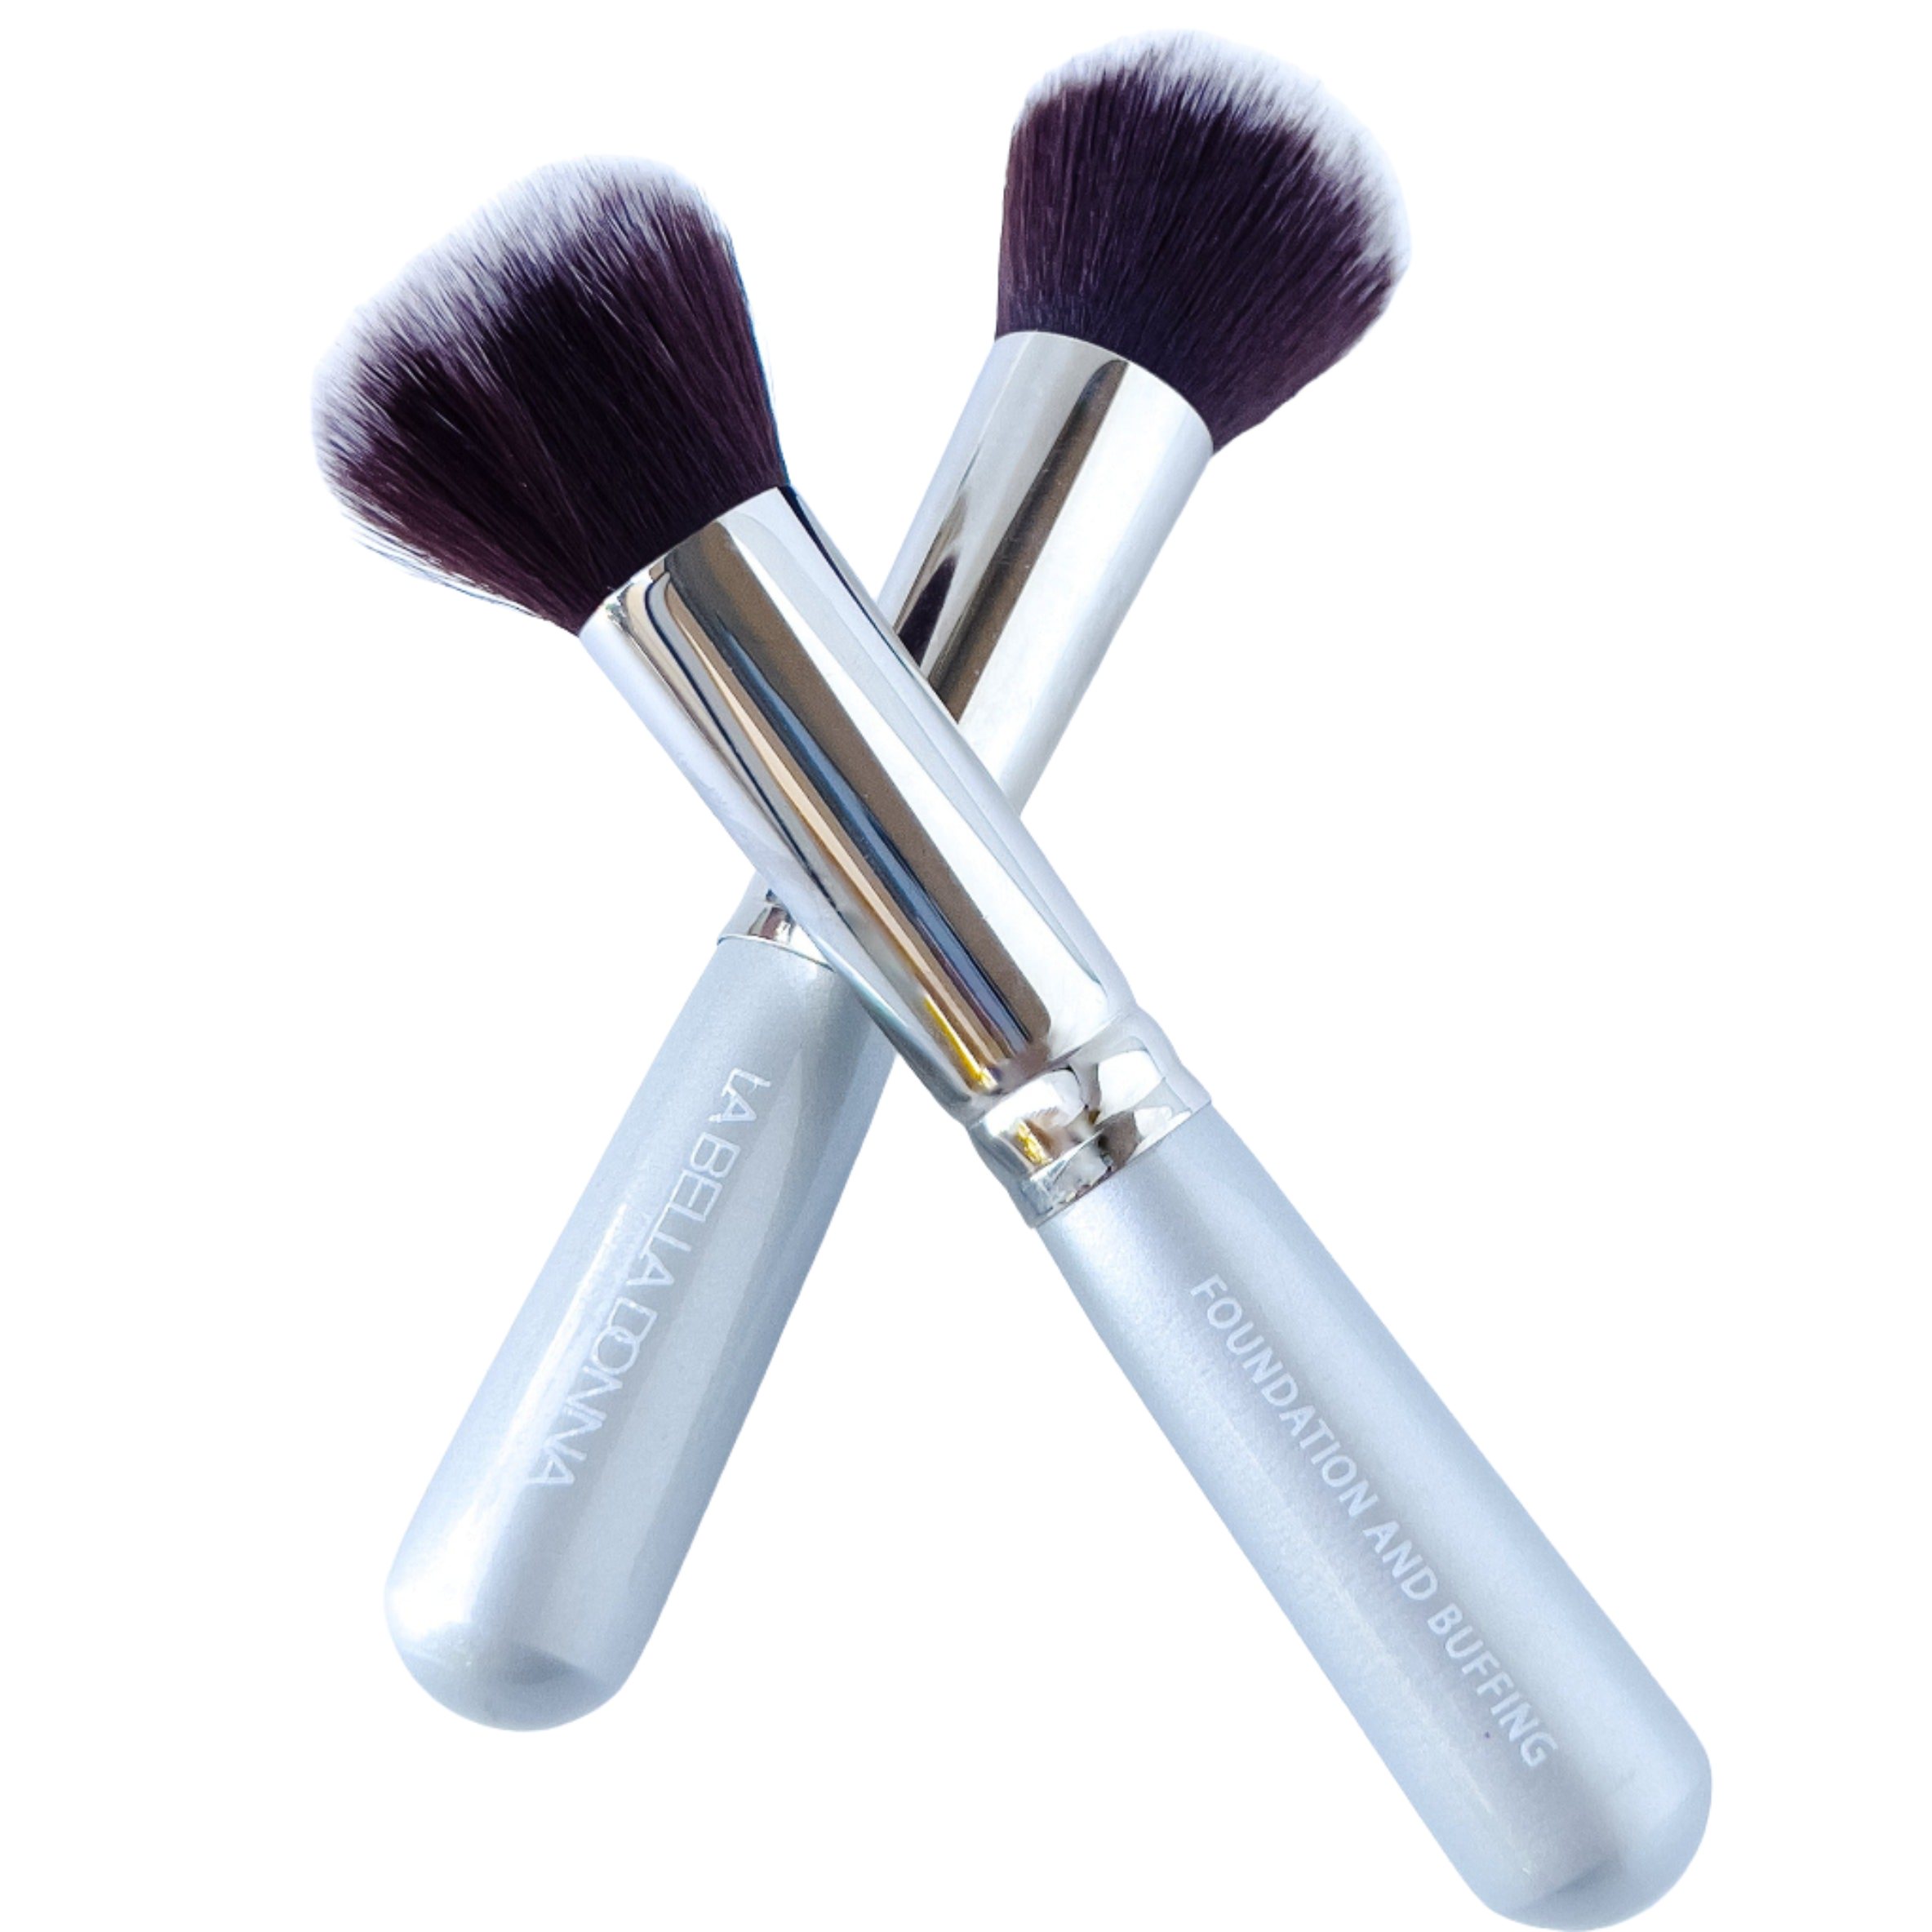 Foundation and Buffing Brush